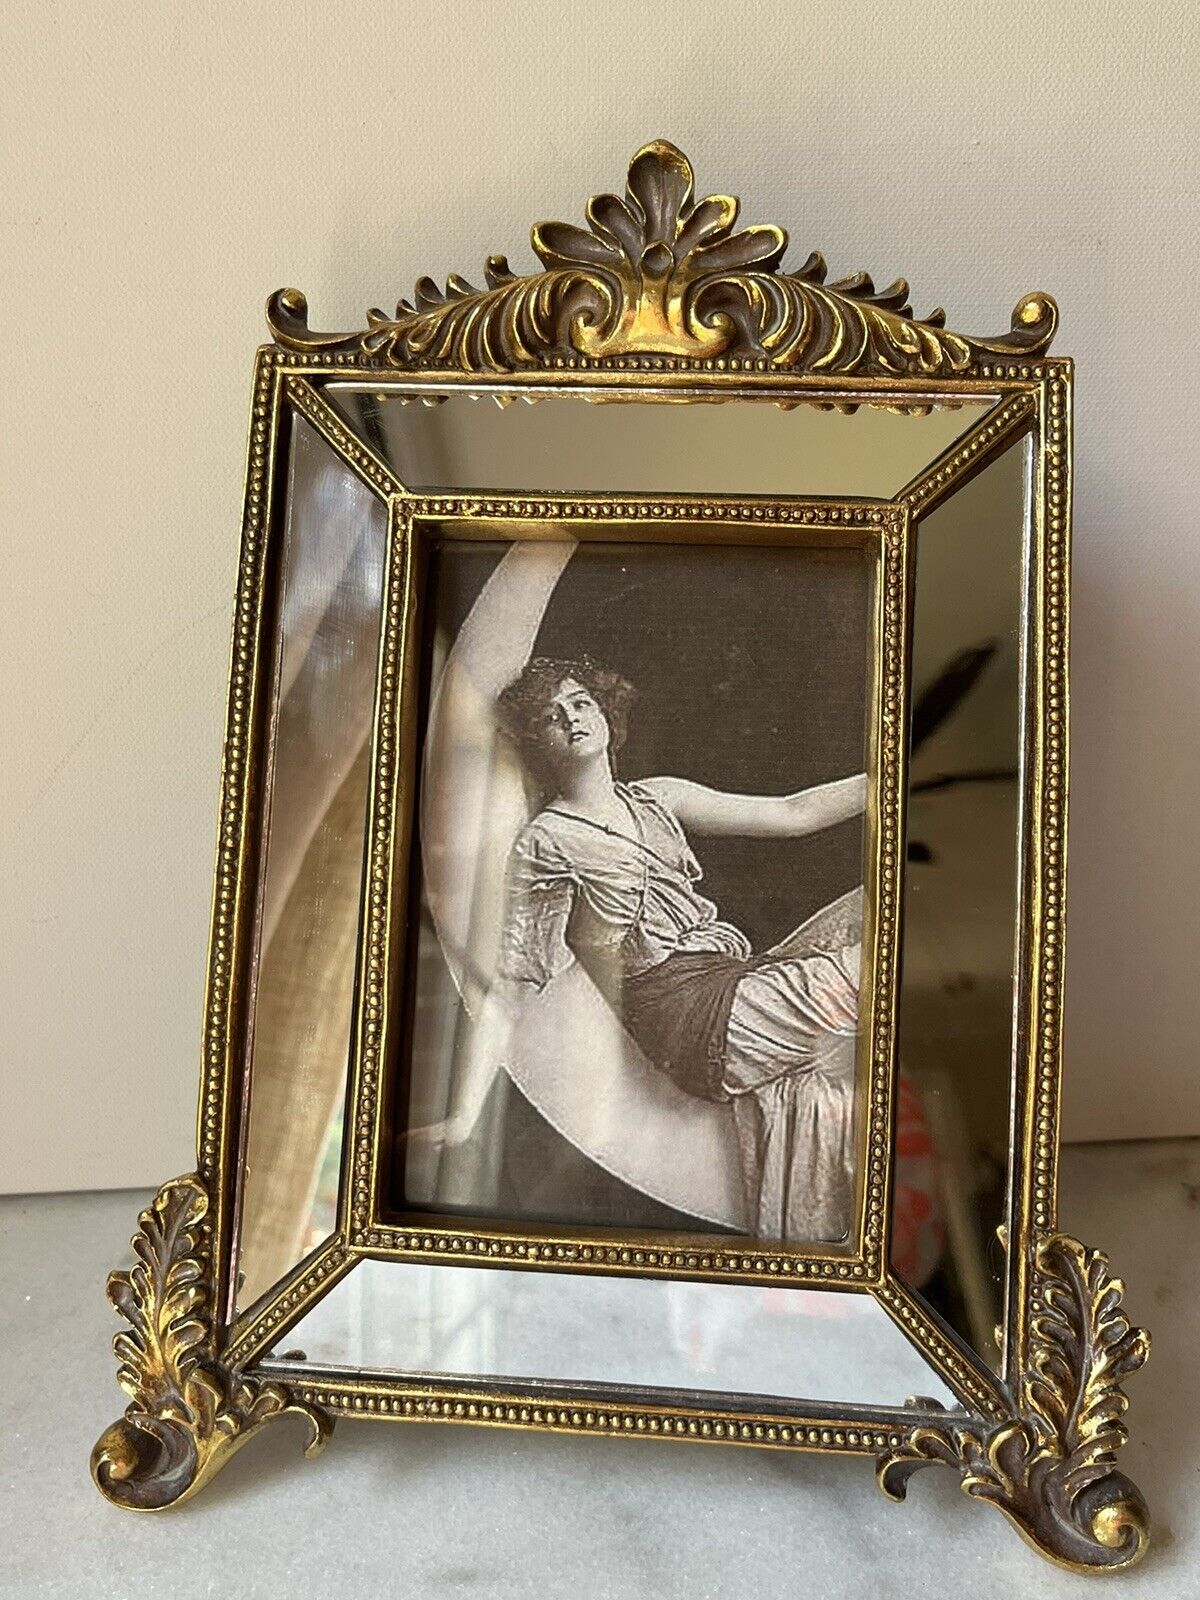 Vintage Gilded Gold Picture Frame  mirror ornate 11”x8” for photo 4”x6”